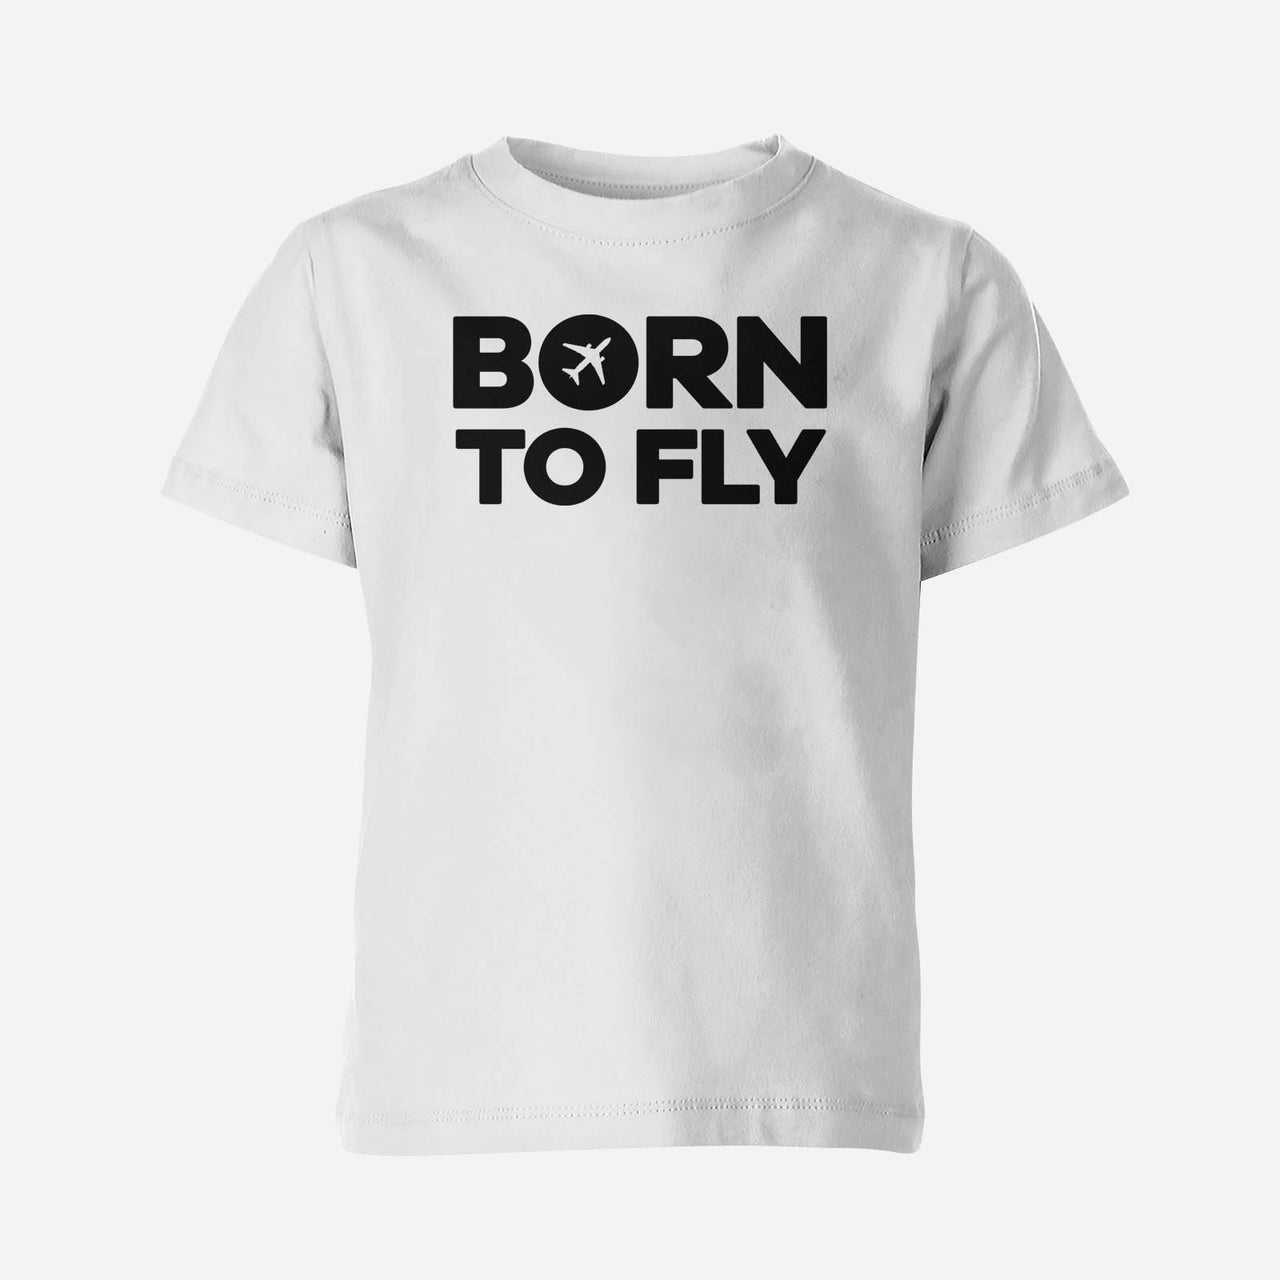 Born To Fly Special Designed Children T-Shirts